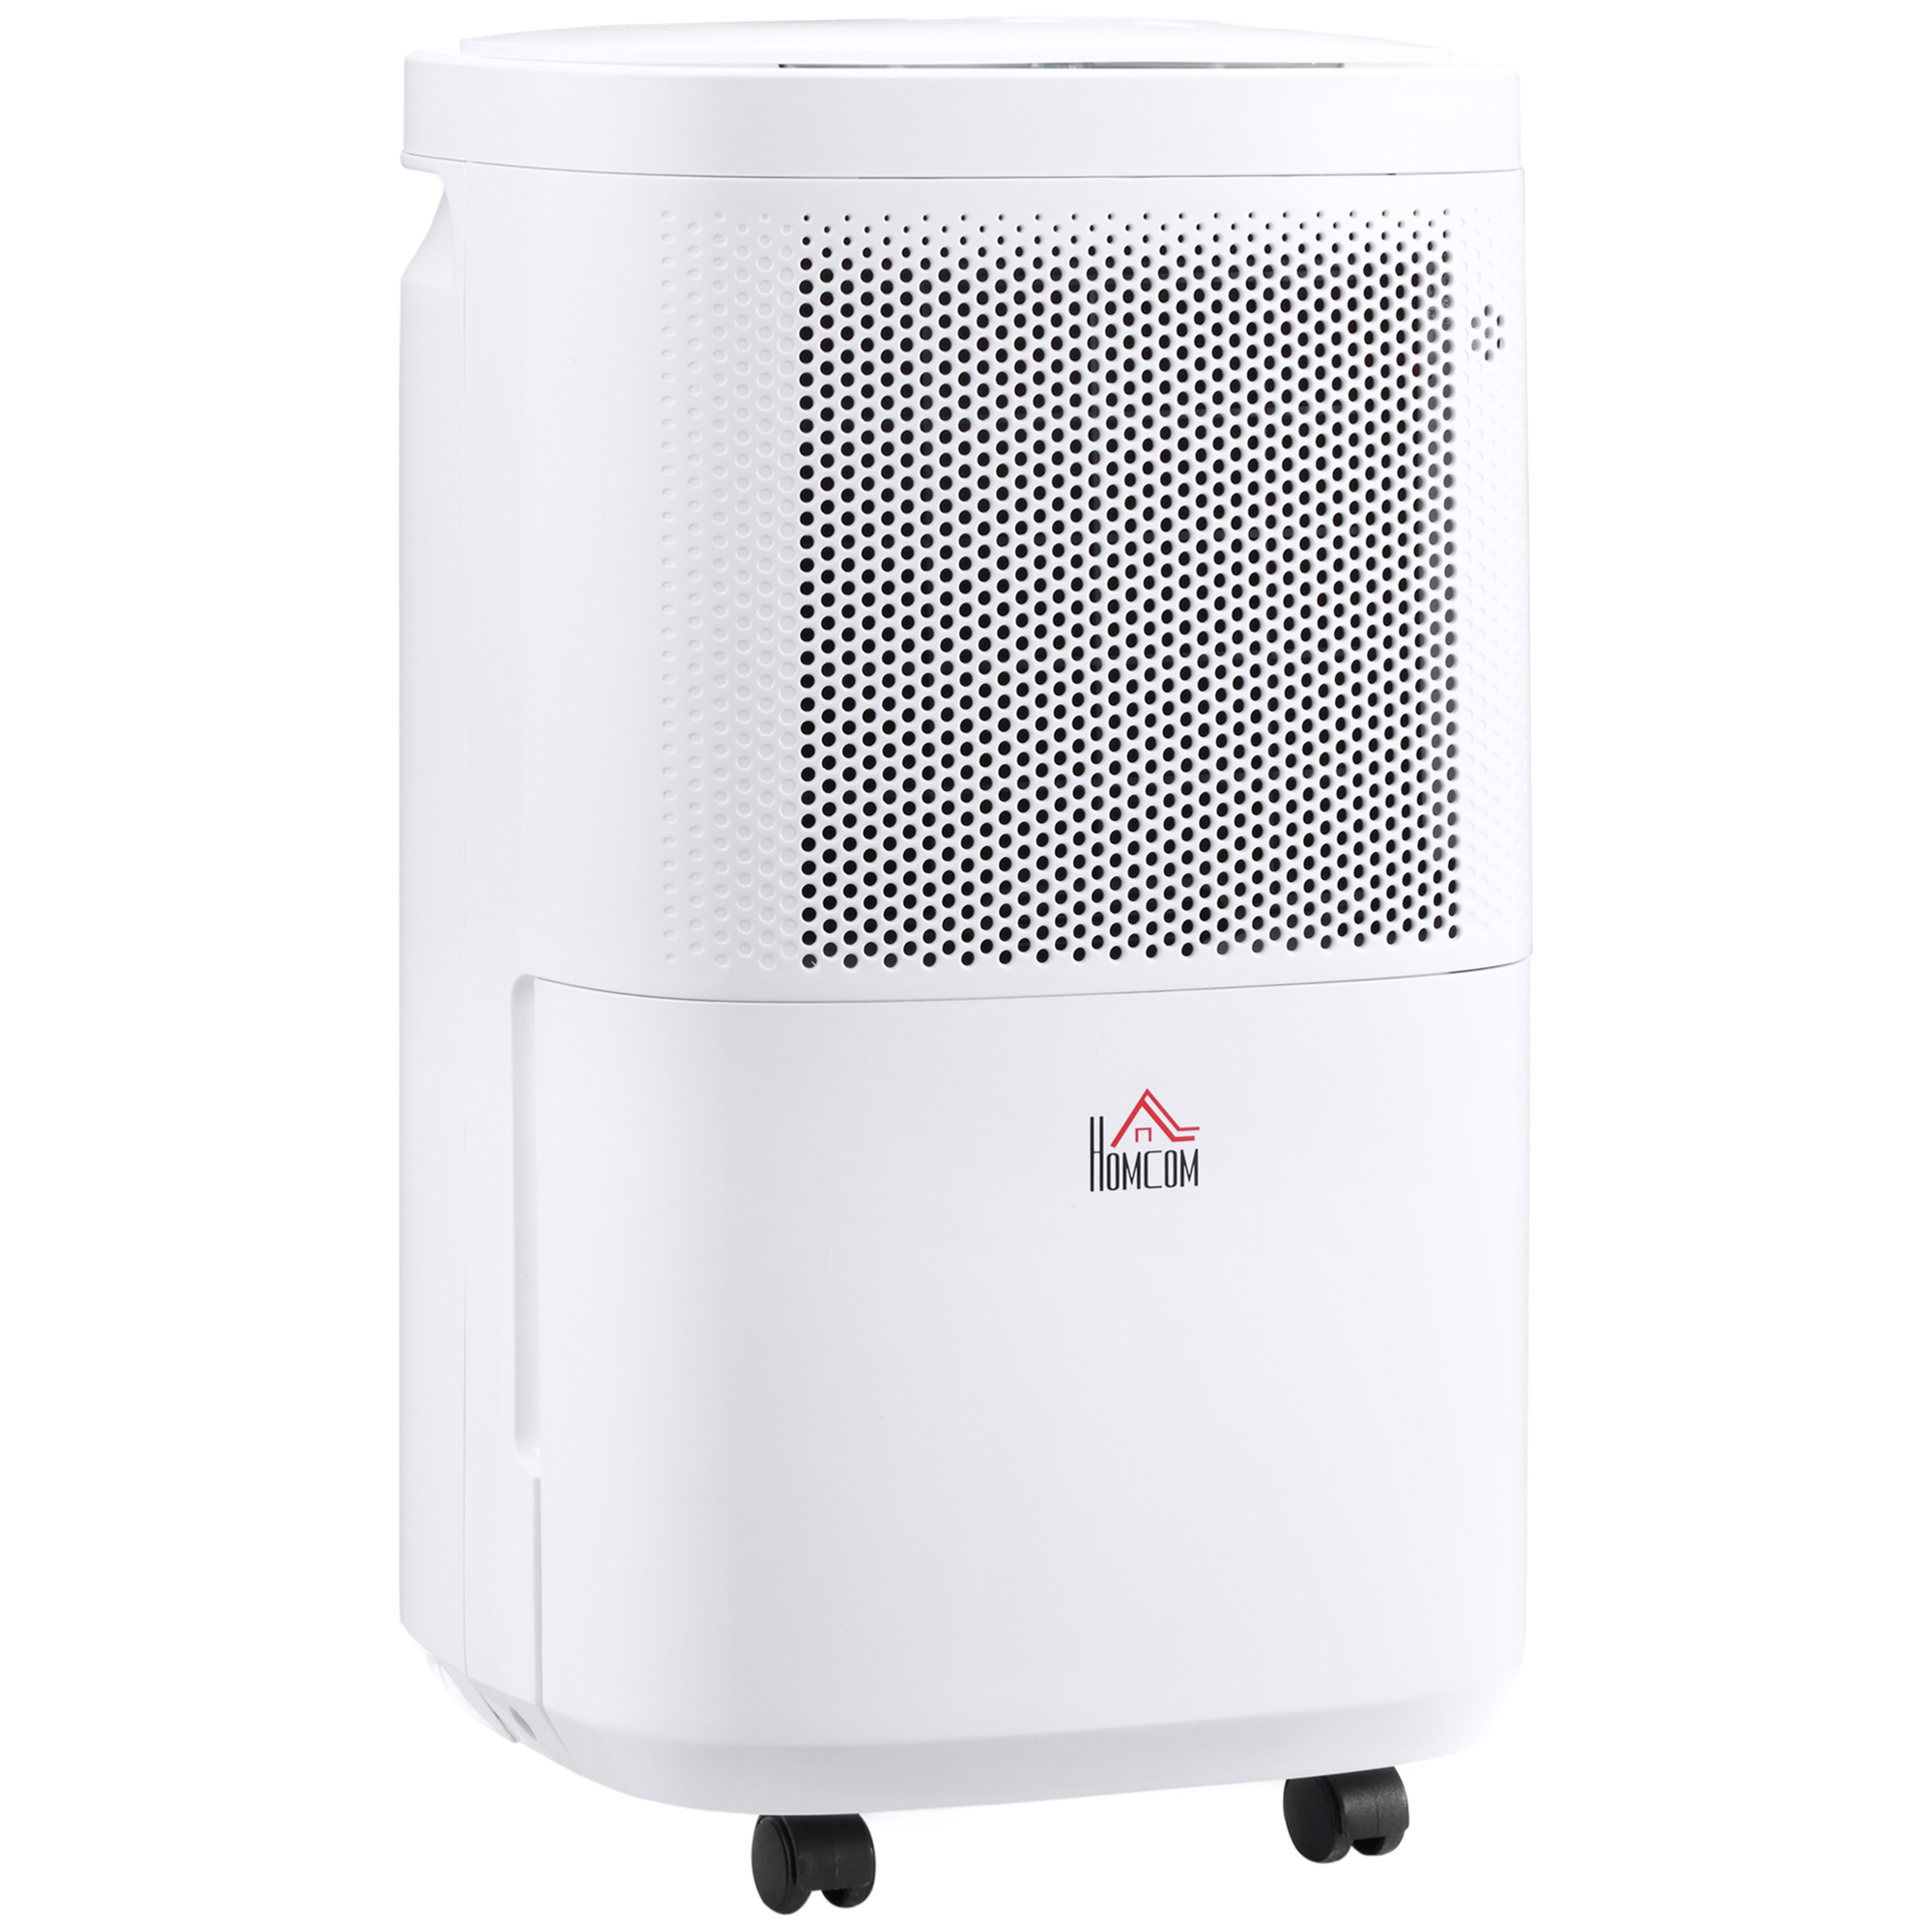 Homcom 10l/day 2200ml Portable Quiet Dehumidifier With Wifi Smart App Control, Electric Moisture Air Dehumidifier For Home Laundry Basement